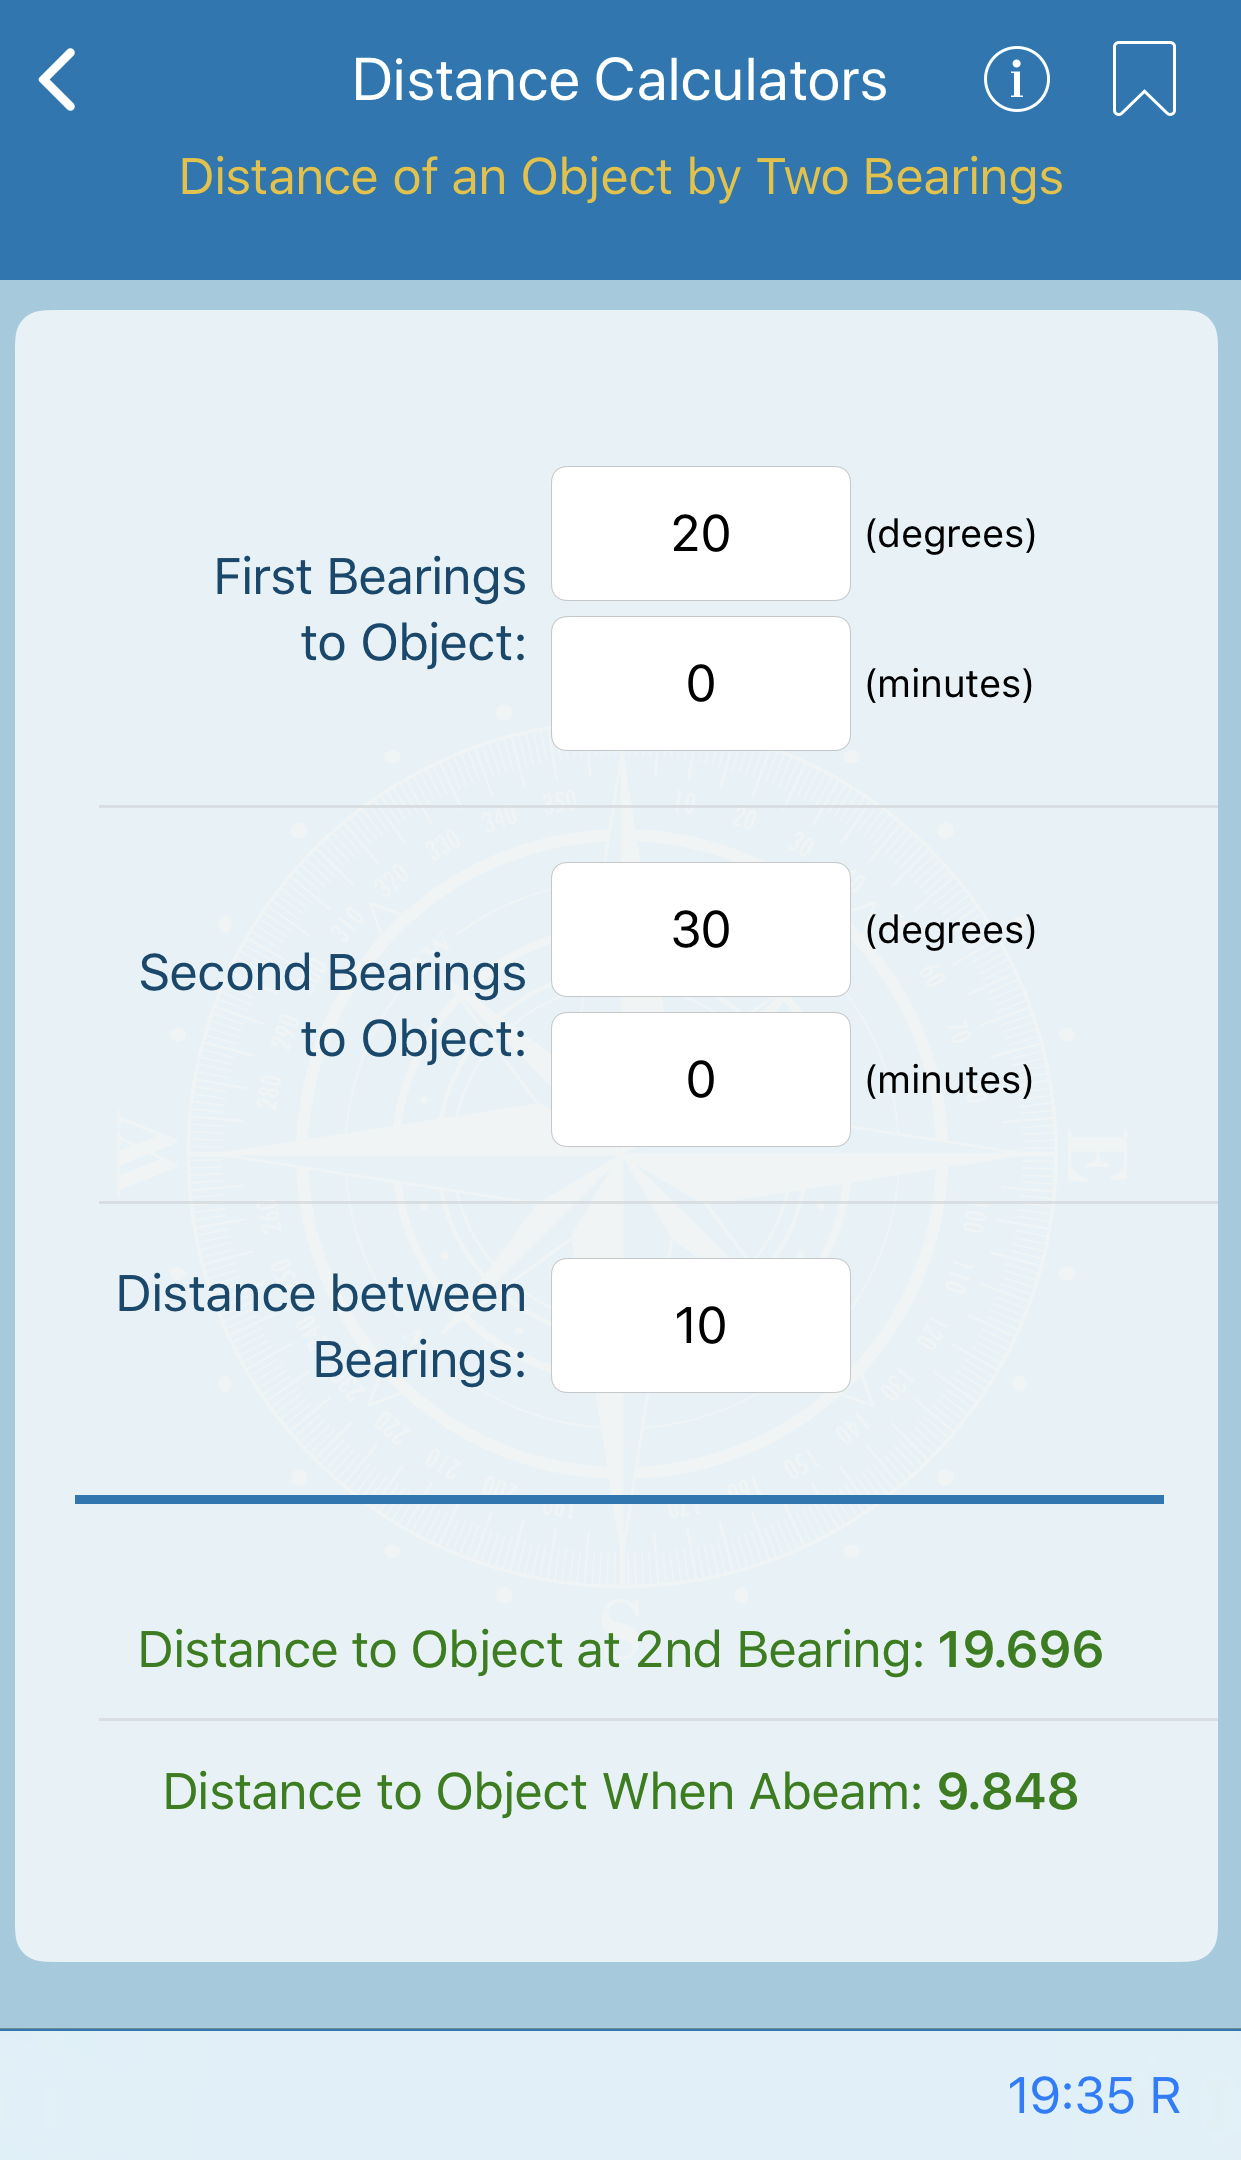 Distance of an Object by Two Bearings